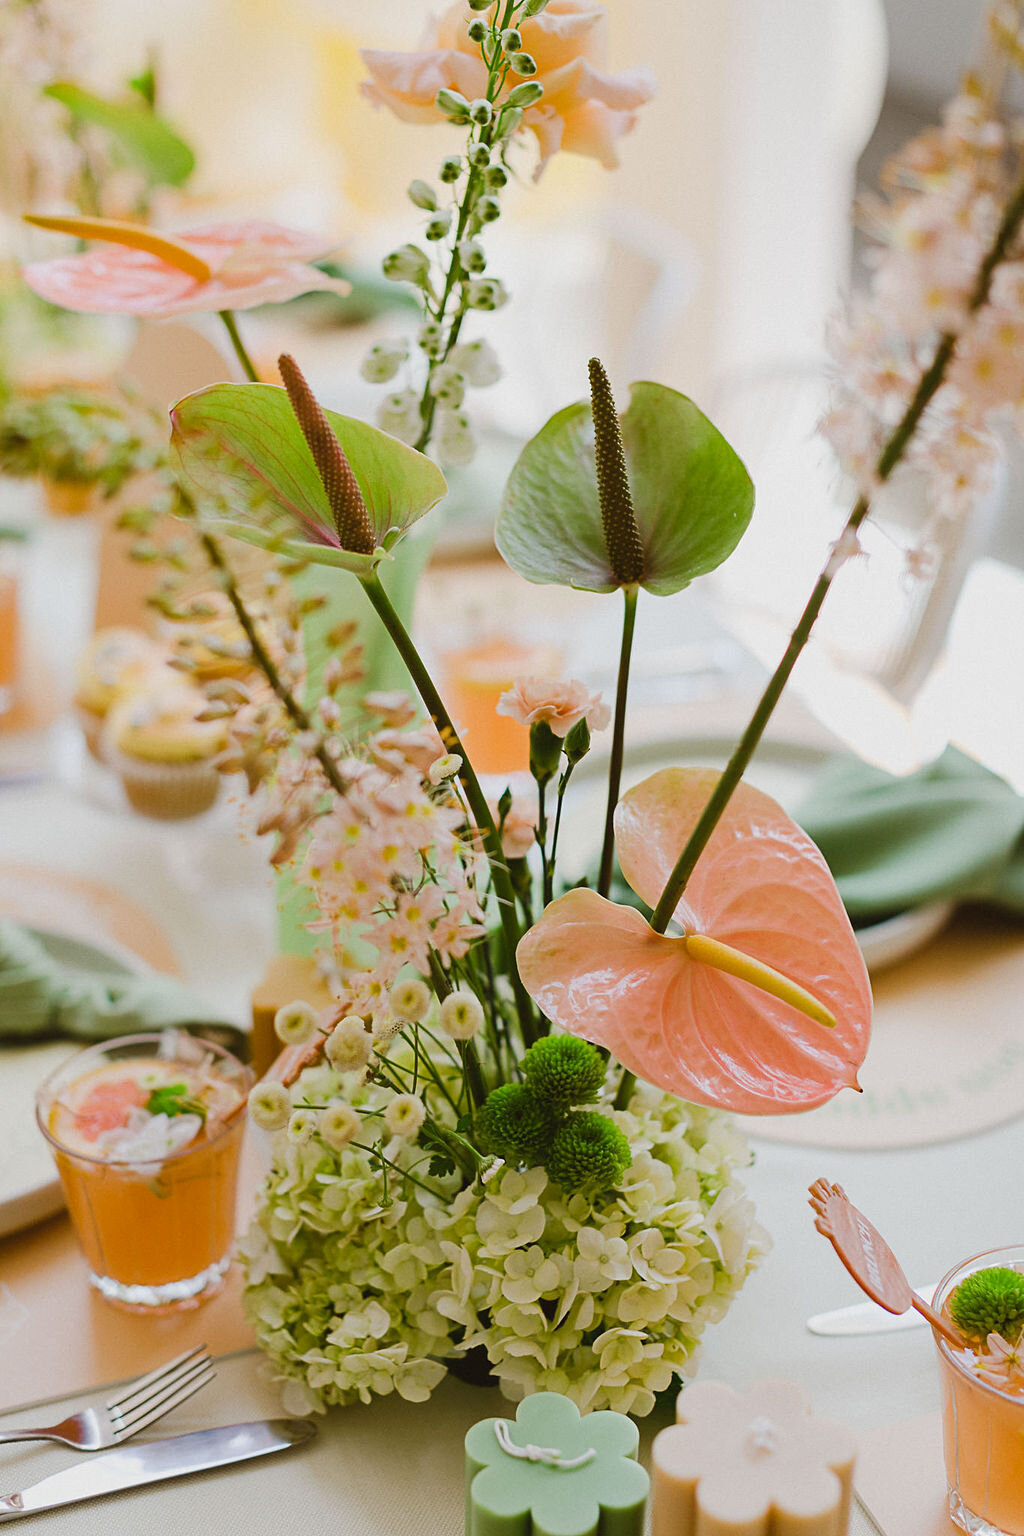 The talented Flower District created fabulous floral arrangements that lined the table. We were thrilled to learn she uses environmentally friendly methods, making the event completely foam-free!